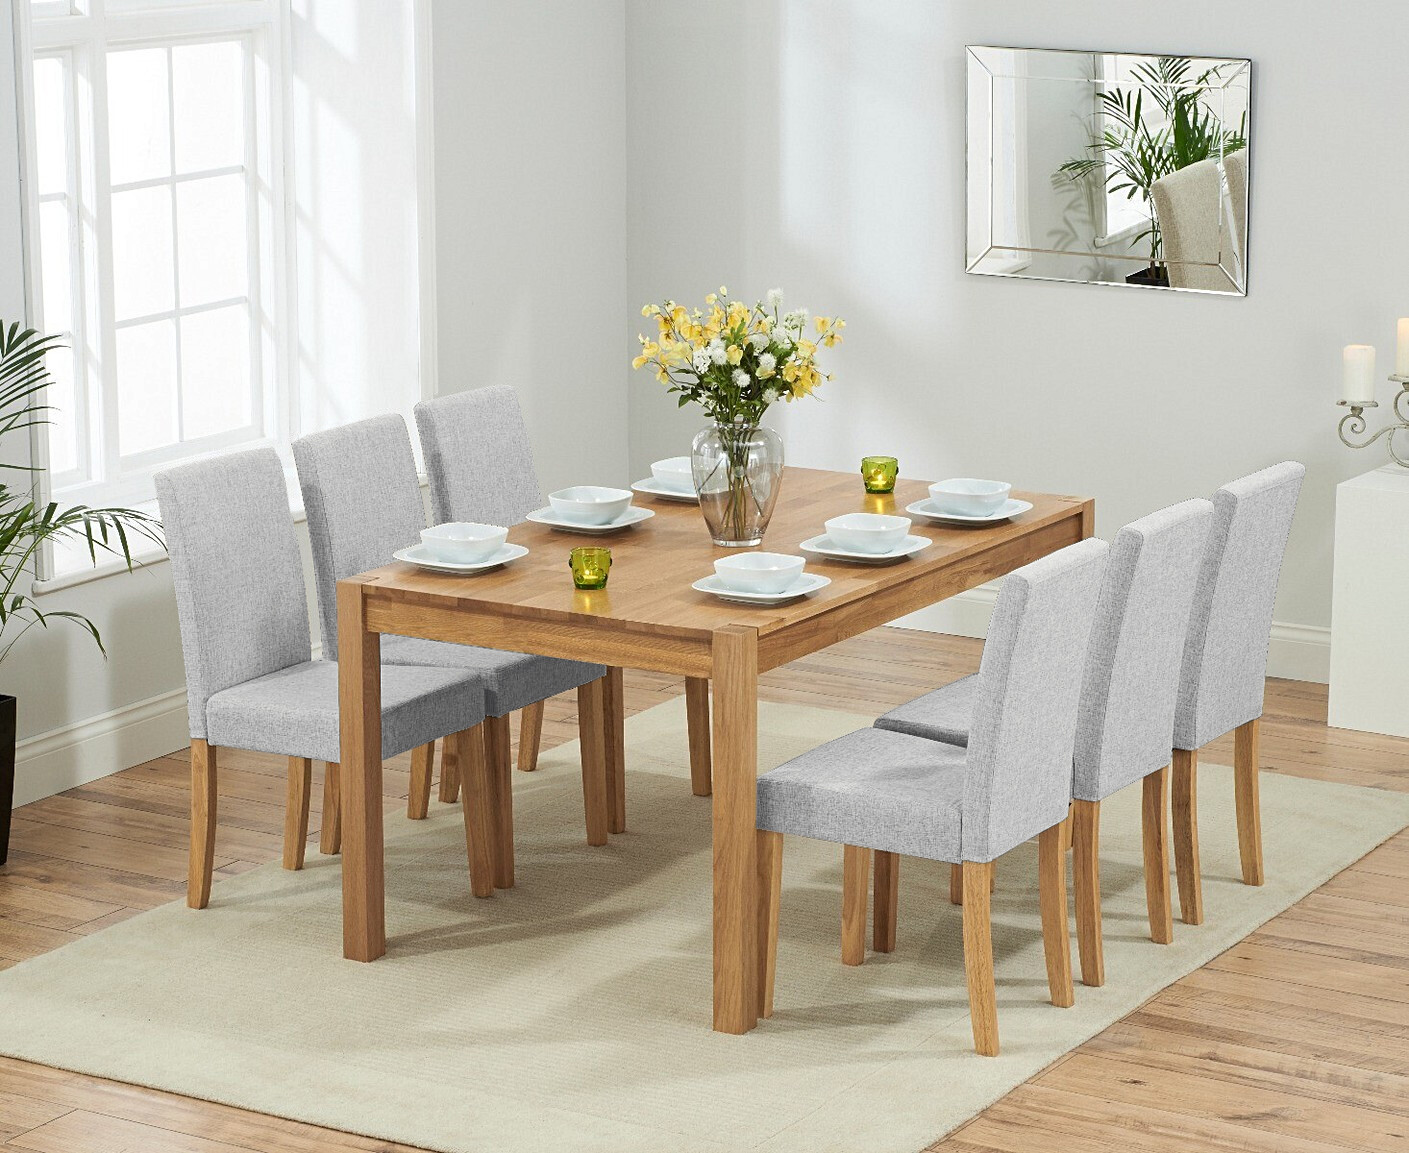 Photo 3 of York 150cm solid oak dining table with 8 charcoal lila chairs